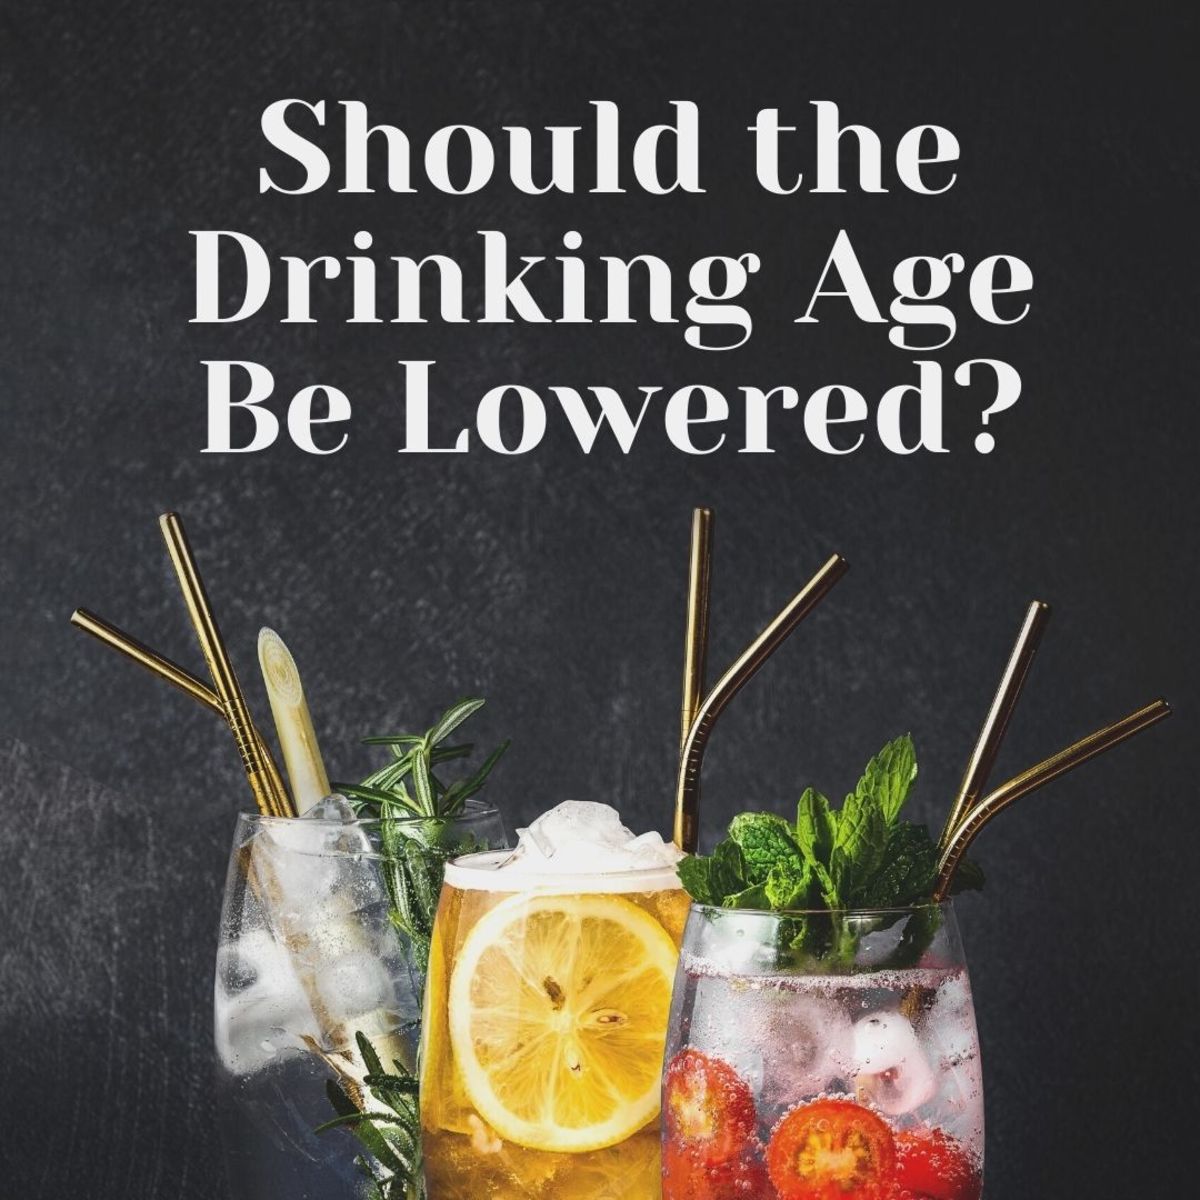 Should the Drinking Age Be Lowered in the United States?